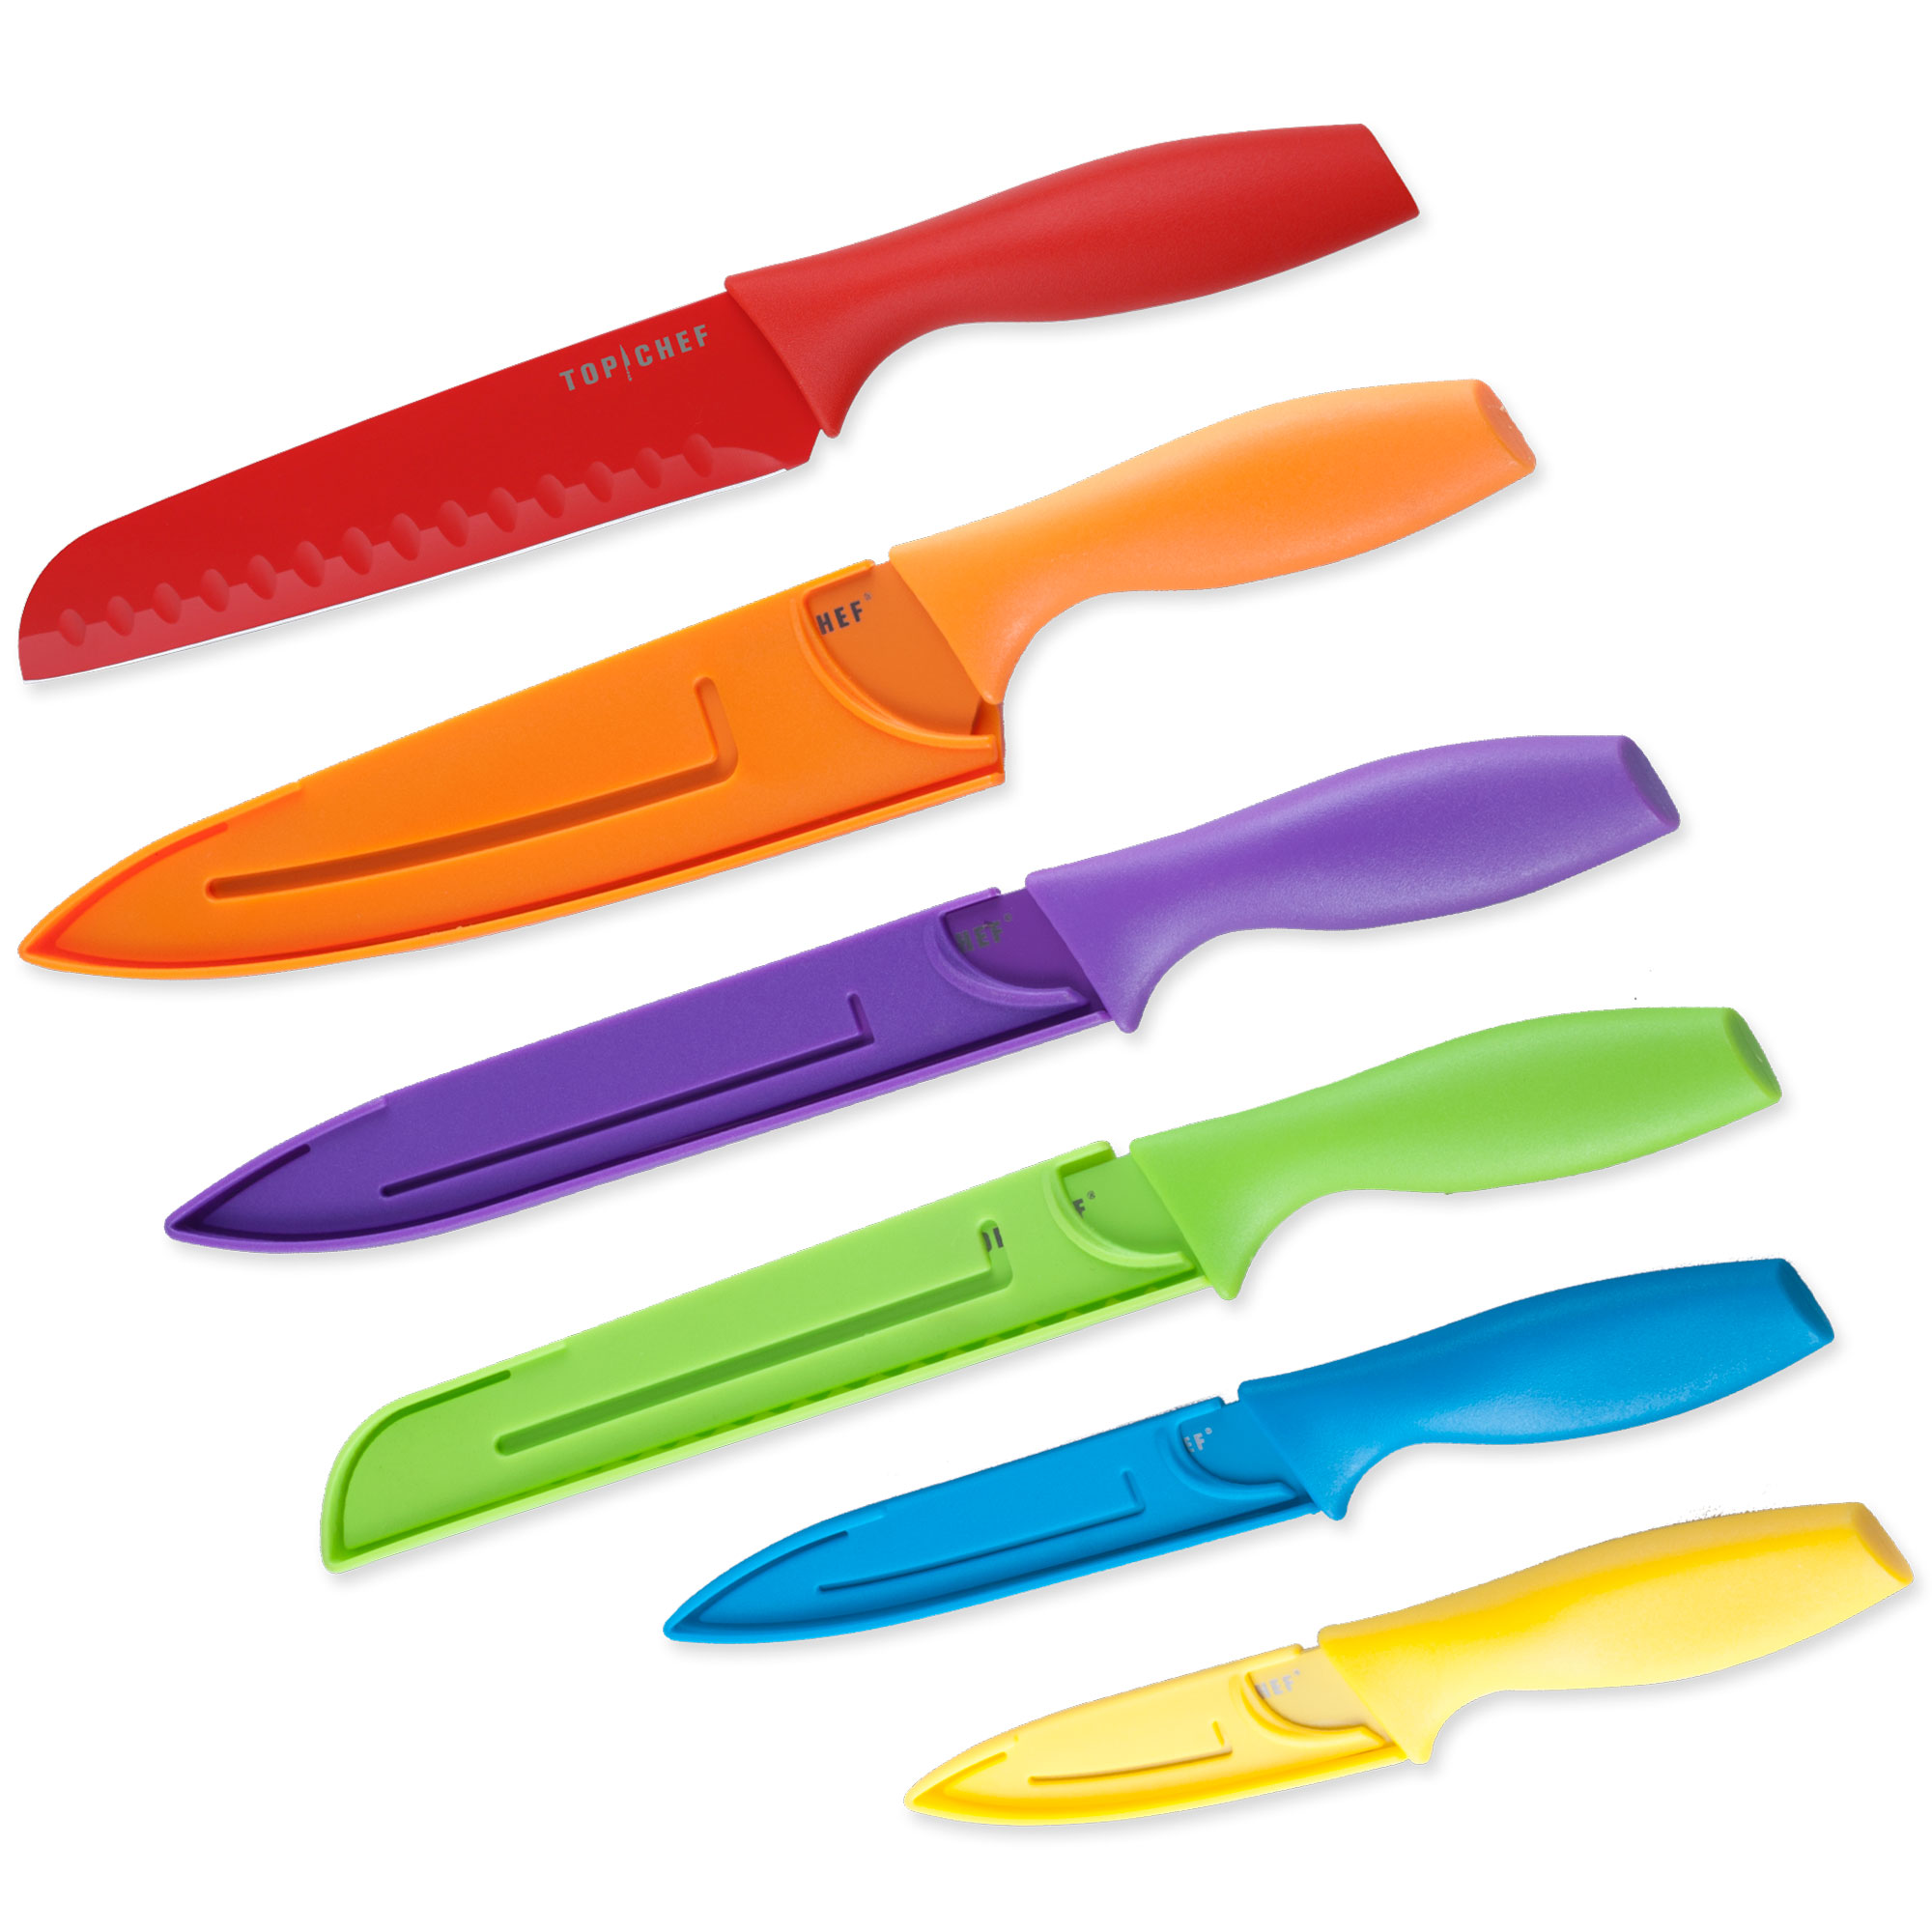 Top Chef 6-Piece Colored Knife Set, Professional Grade - image 1 of 4